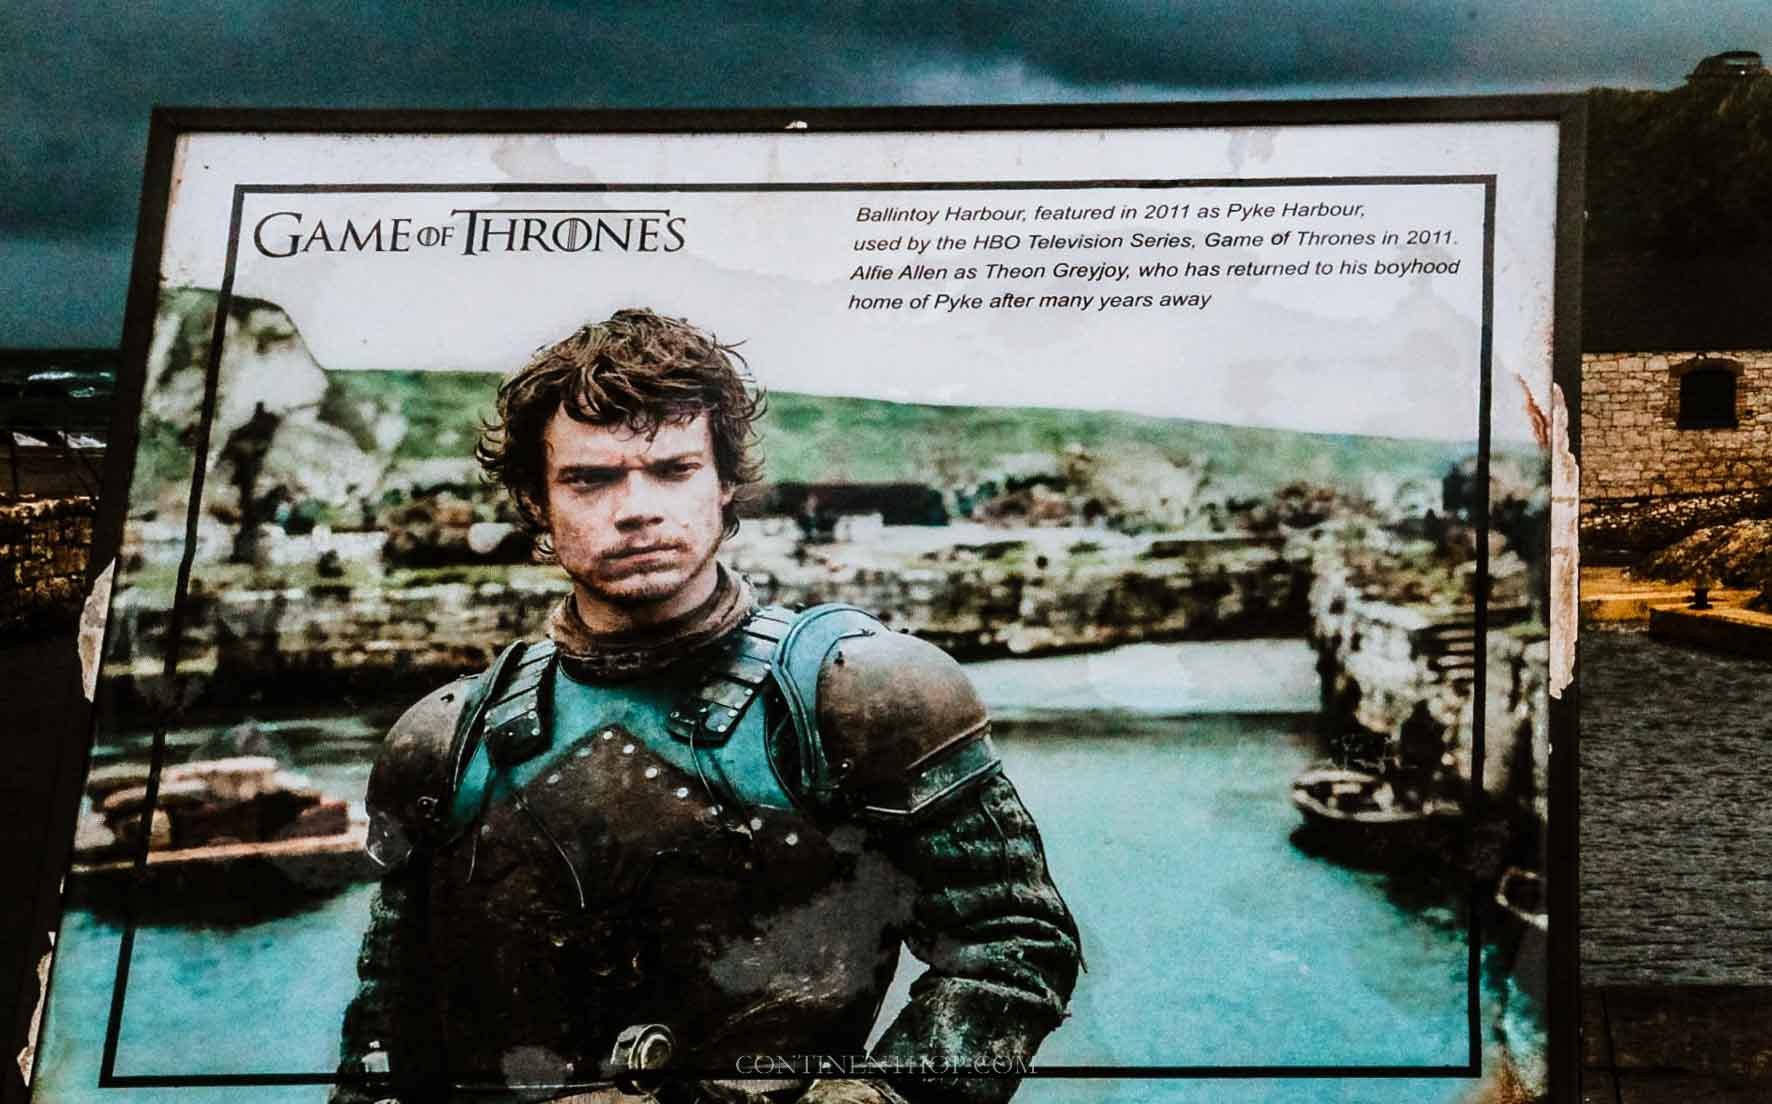 Plaque in front of Ballintoy Harbour in Northern Ireland Game of Thrones Locations